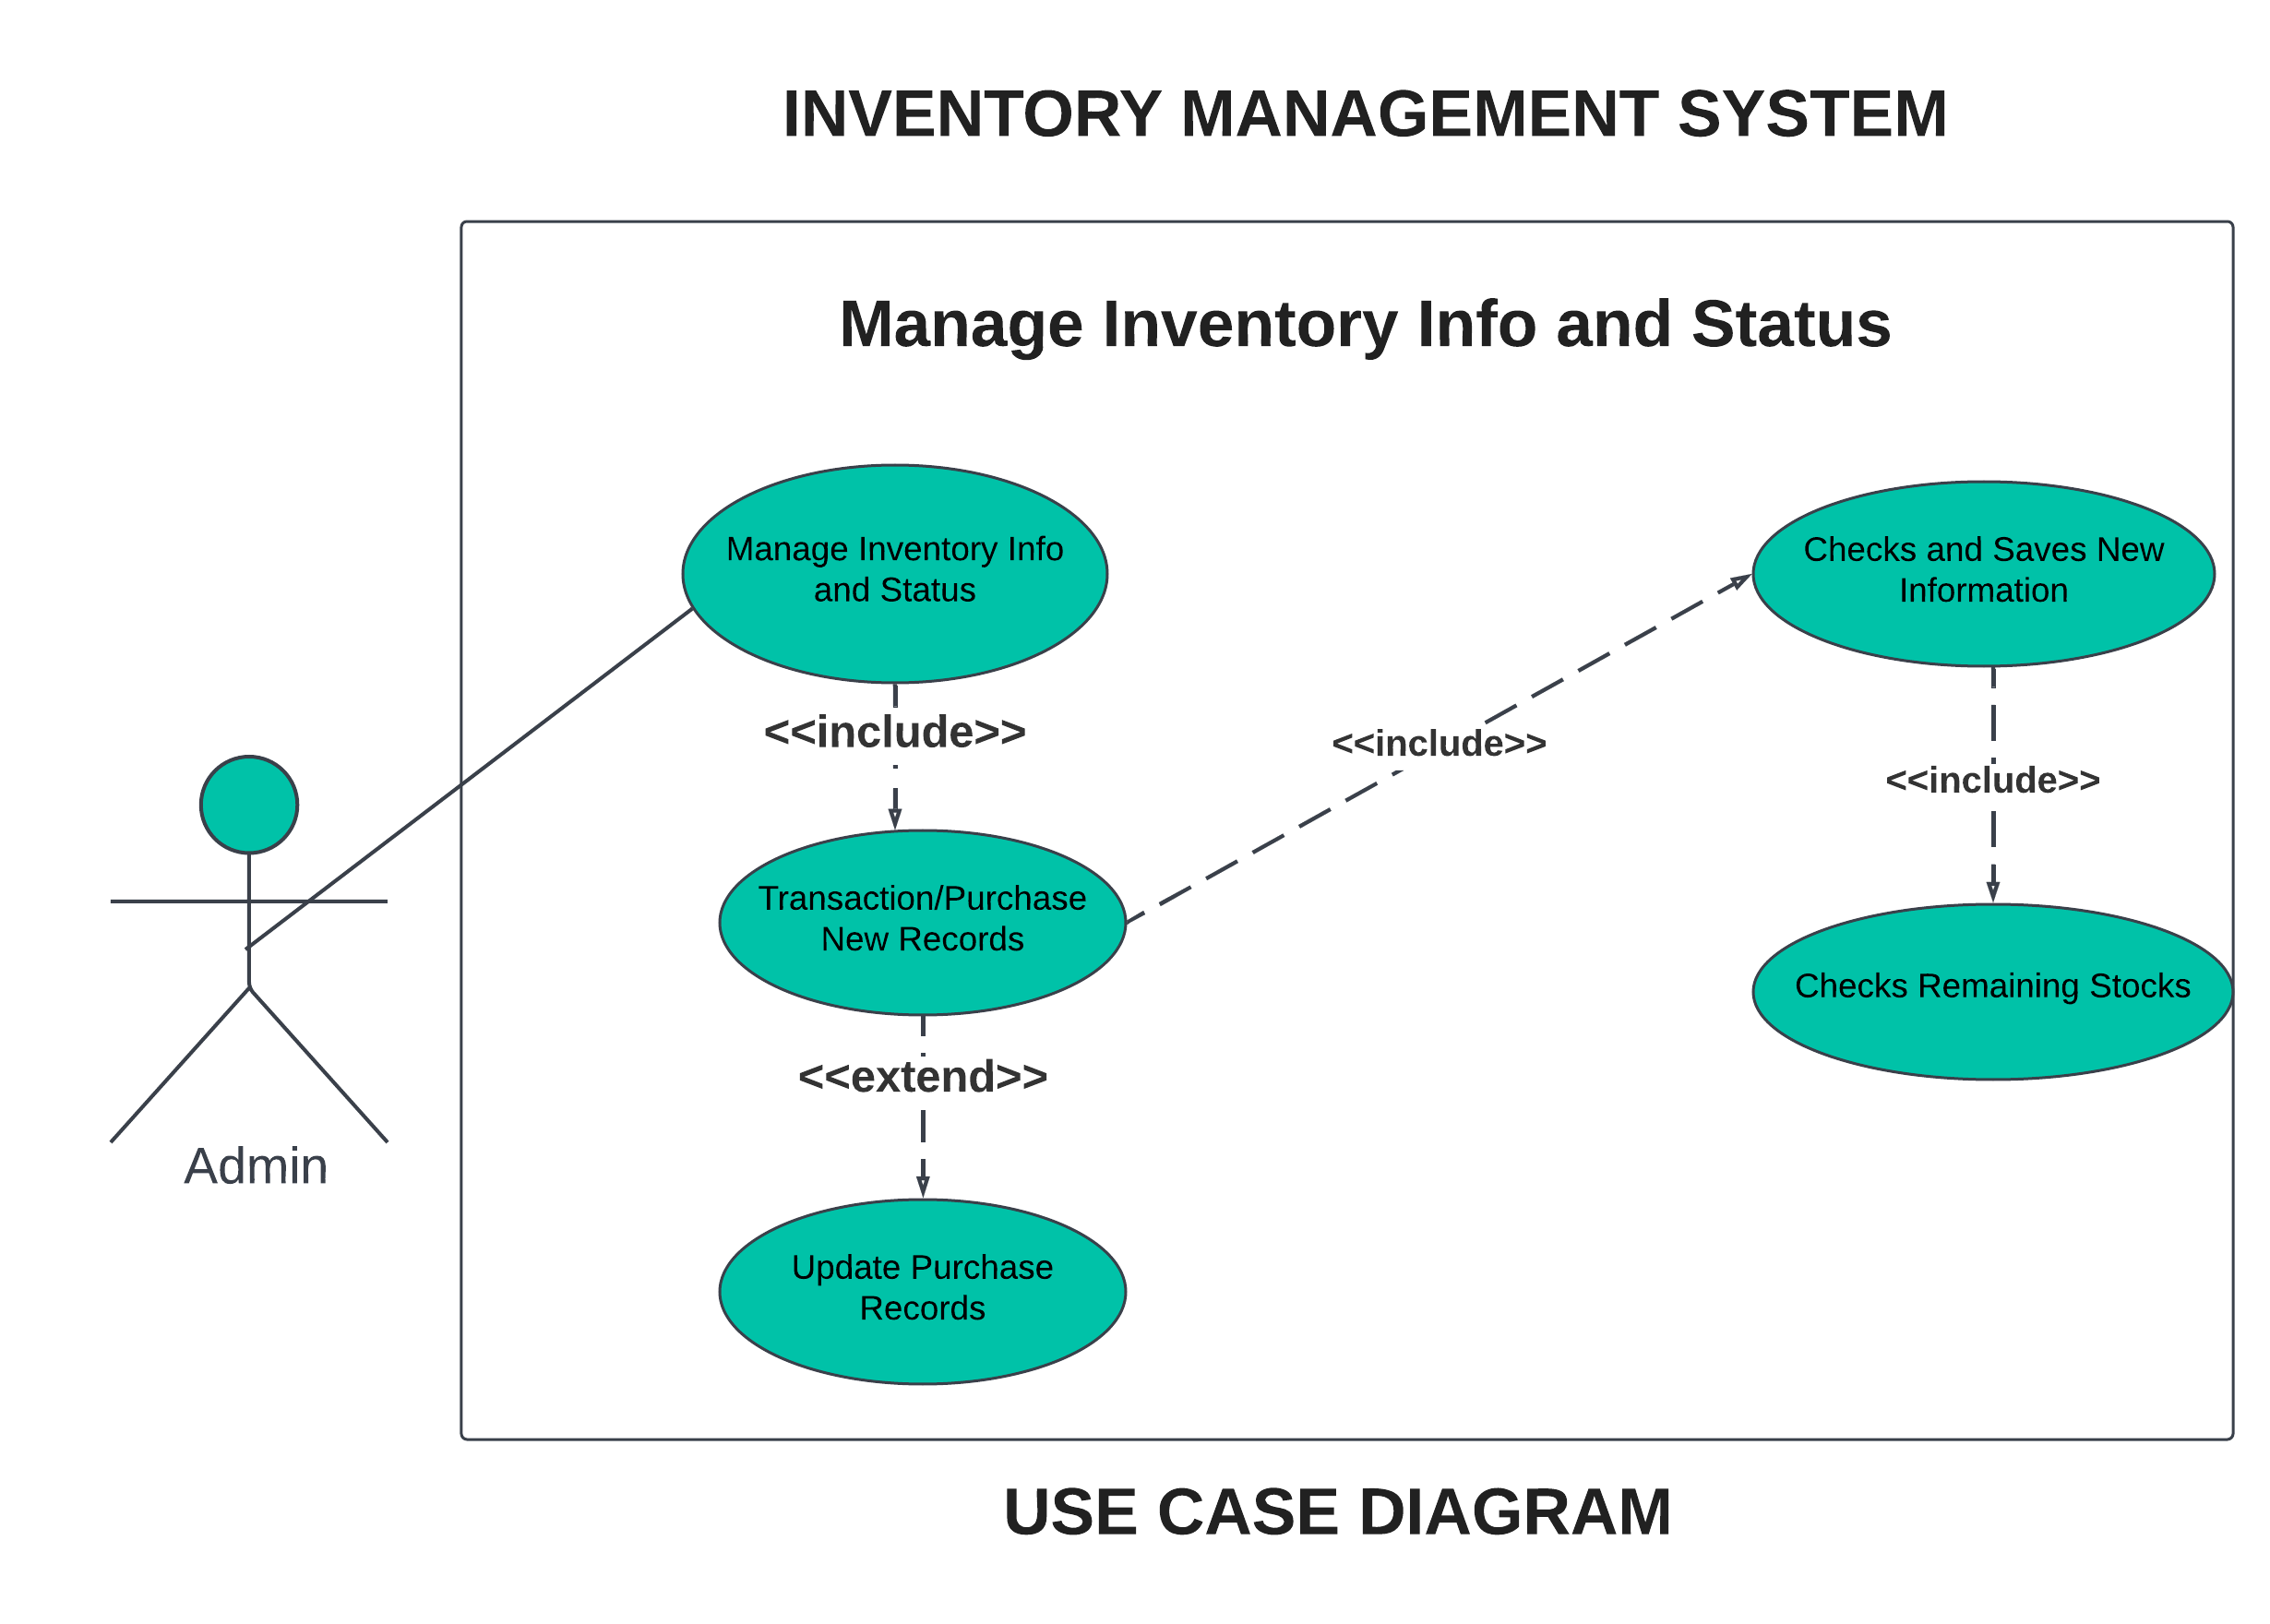 MANAGE INVENTORY INFO AND STATUS USE CASE DIAGRAM